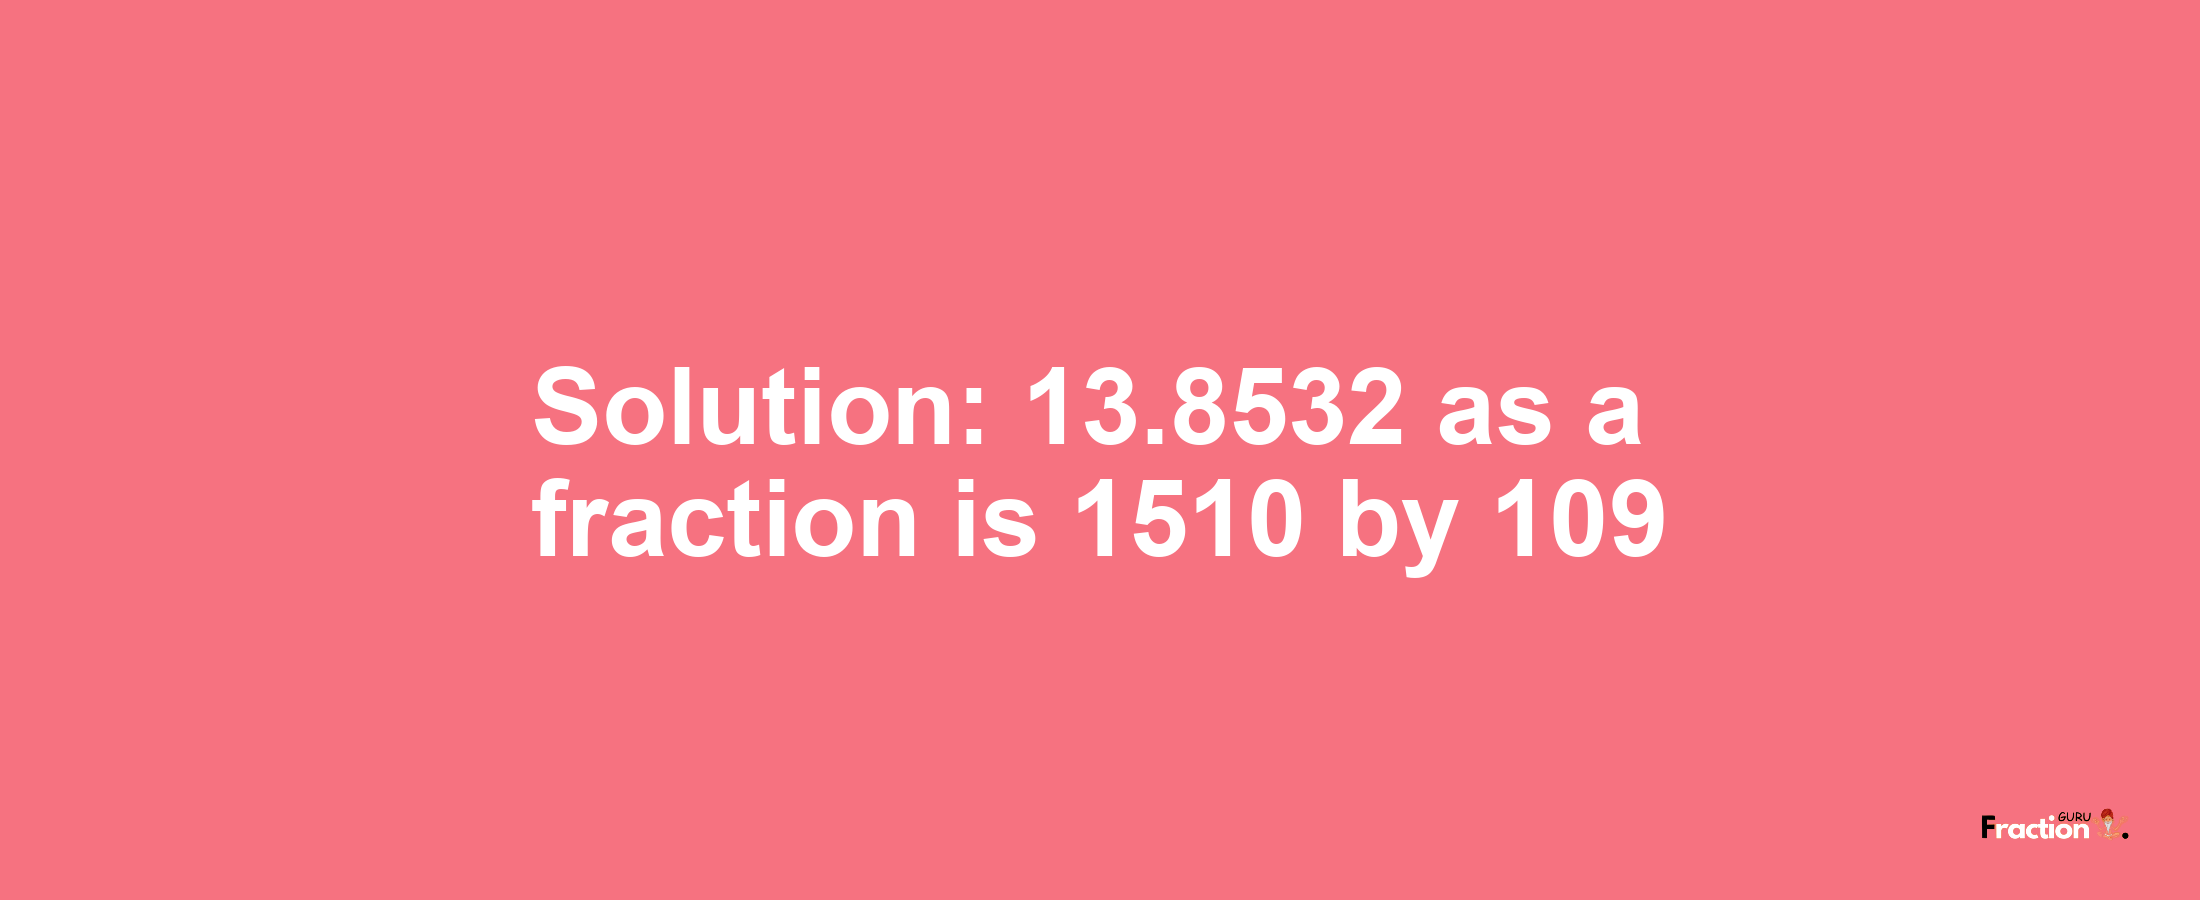 Solution:13.8532 as a fraction is 1510/109